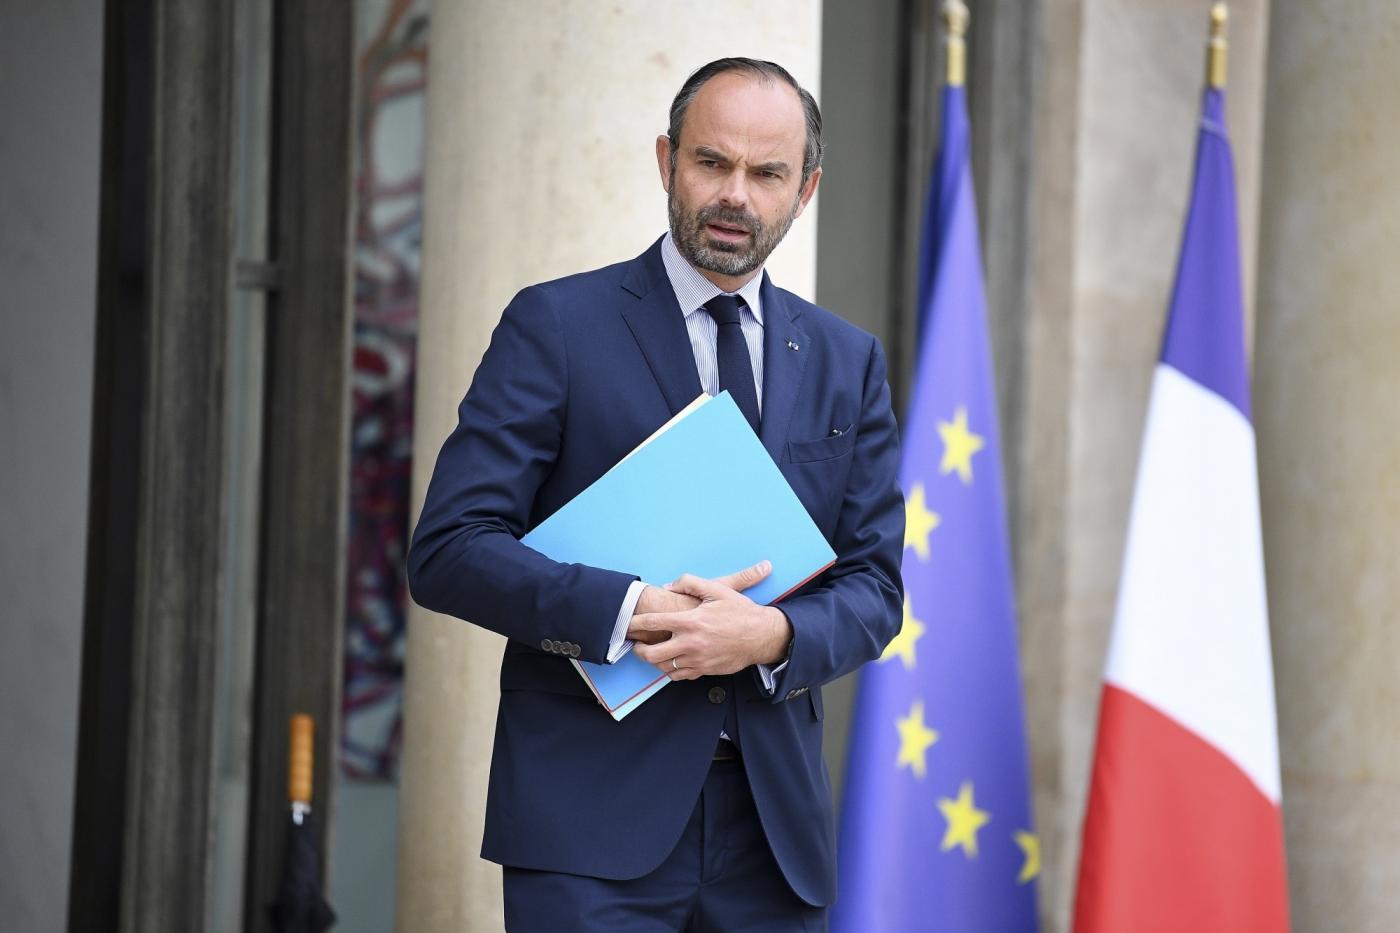 PARIS, Oct. 17, 2018 (Xinhua) -- French Prime Minister Edouard Philippe leaves the Elysee Palace after the cabinet meeting in Paris, France on Oct. 17, 2018. French President Emmanuel Macron on Tuesday named Christophe Castaner, one of his main backers, to supervise interior affairs and replace Gerard Collomb, in his latest cabinet reshuffle. (Xinhua/Jack Chan/IANS) by .